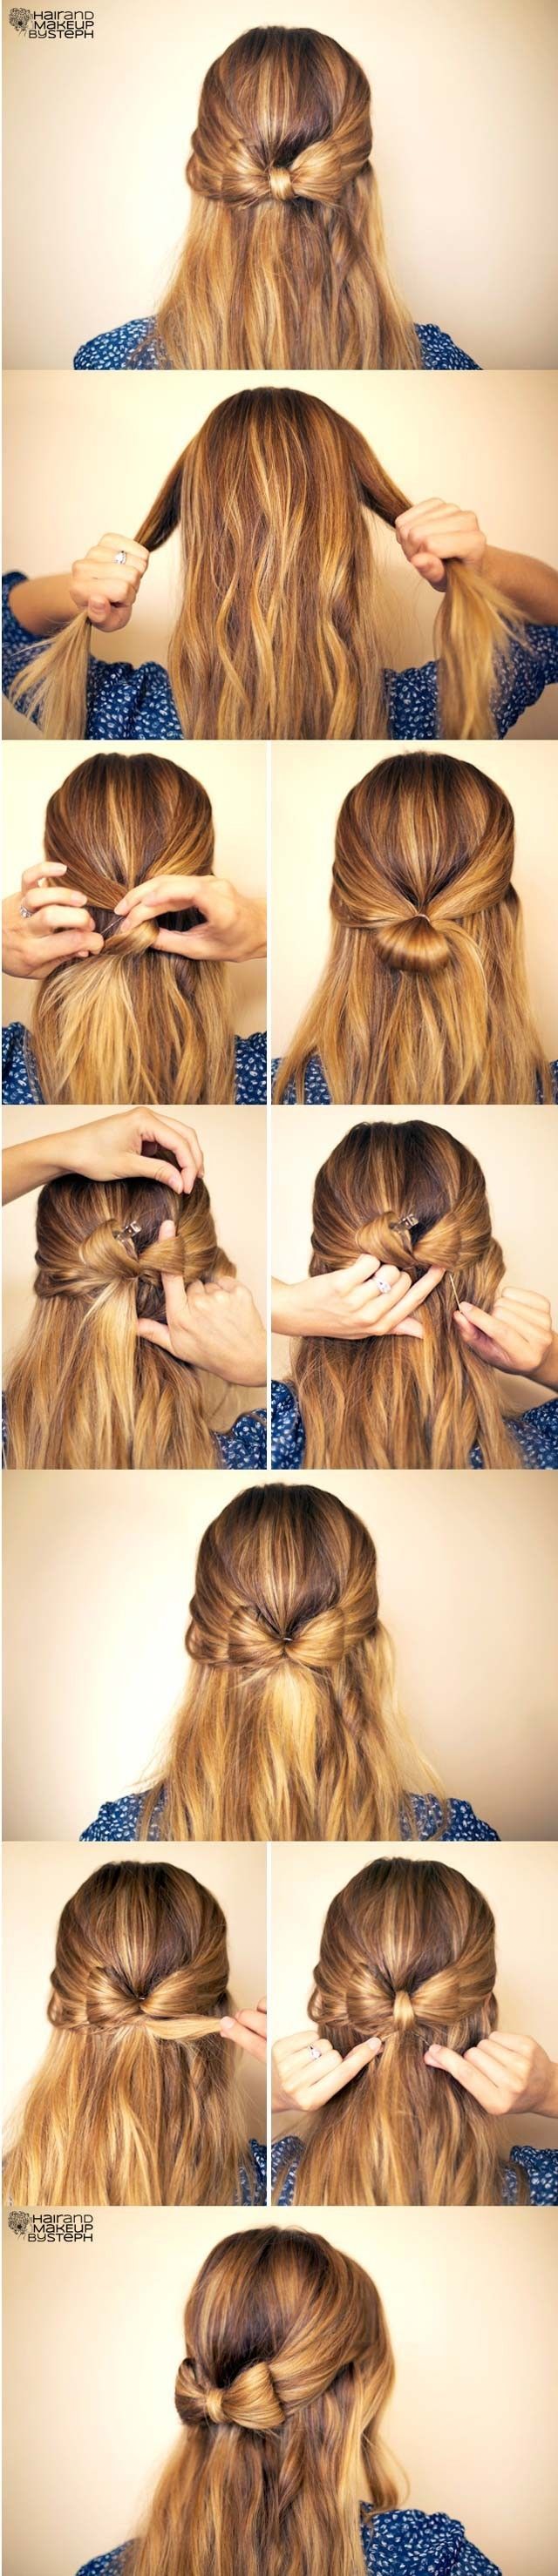 15 Cute hairstyles: Step-by-Step Hairstyles for Long Hair | PoPular